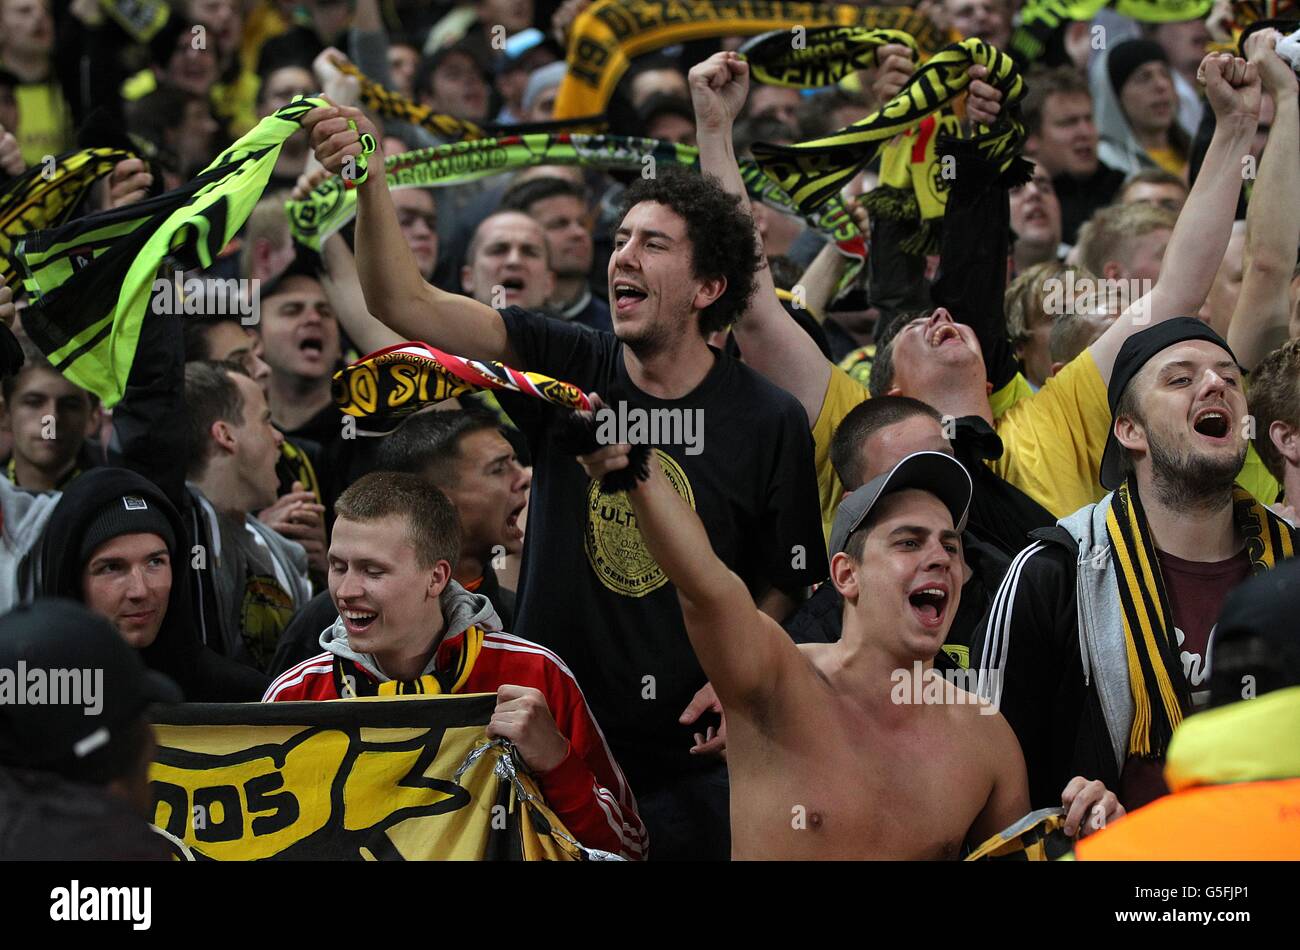 Borussia Dortmund fans in celebratory mood in the stands Stock Photo